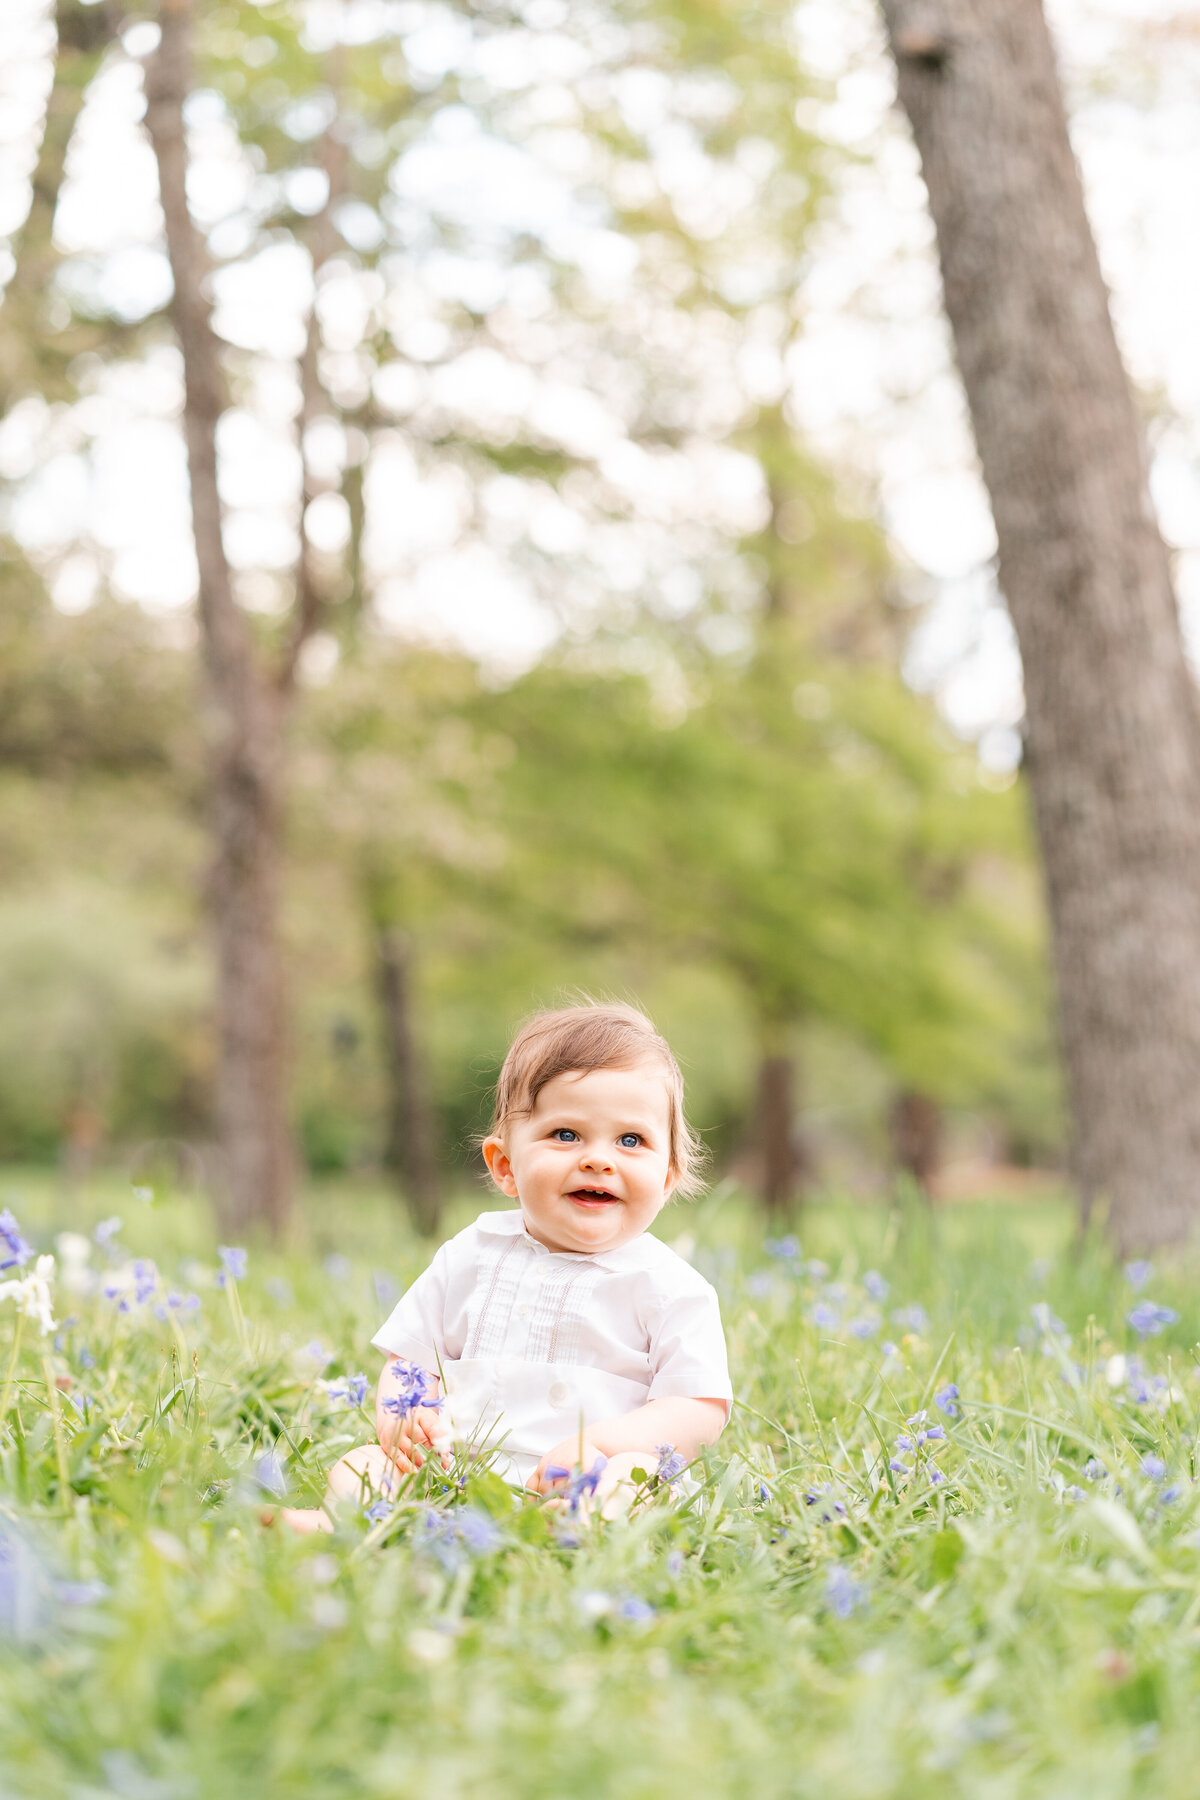 Photographer in Chattanooga, TN Kelley Hoagland takes photo of baby boy posing in seated in grass at McCoy Farms Signal Mountain photo location.